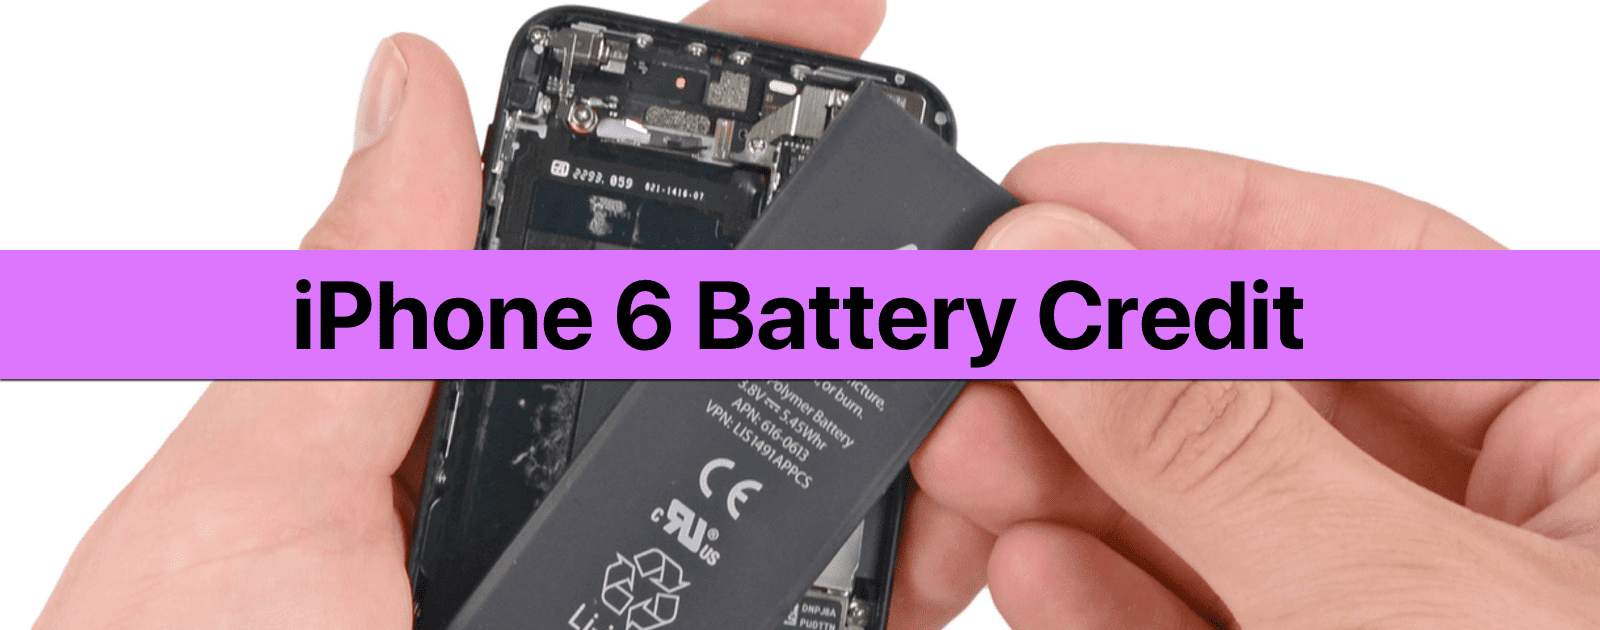 Did You Pay for a New iPhone 6 Battery? You Can Get Money Back